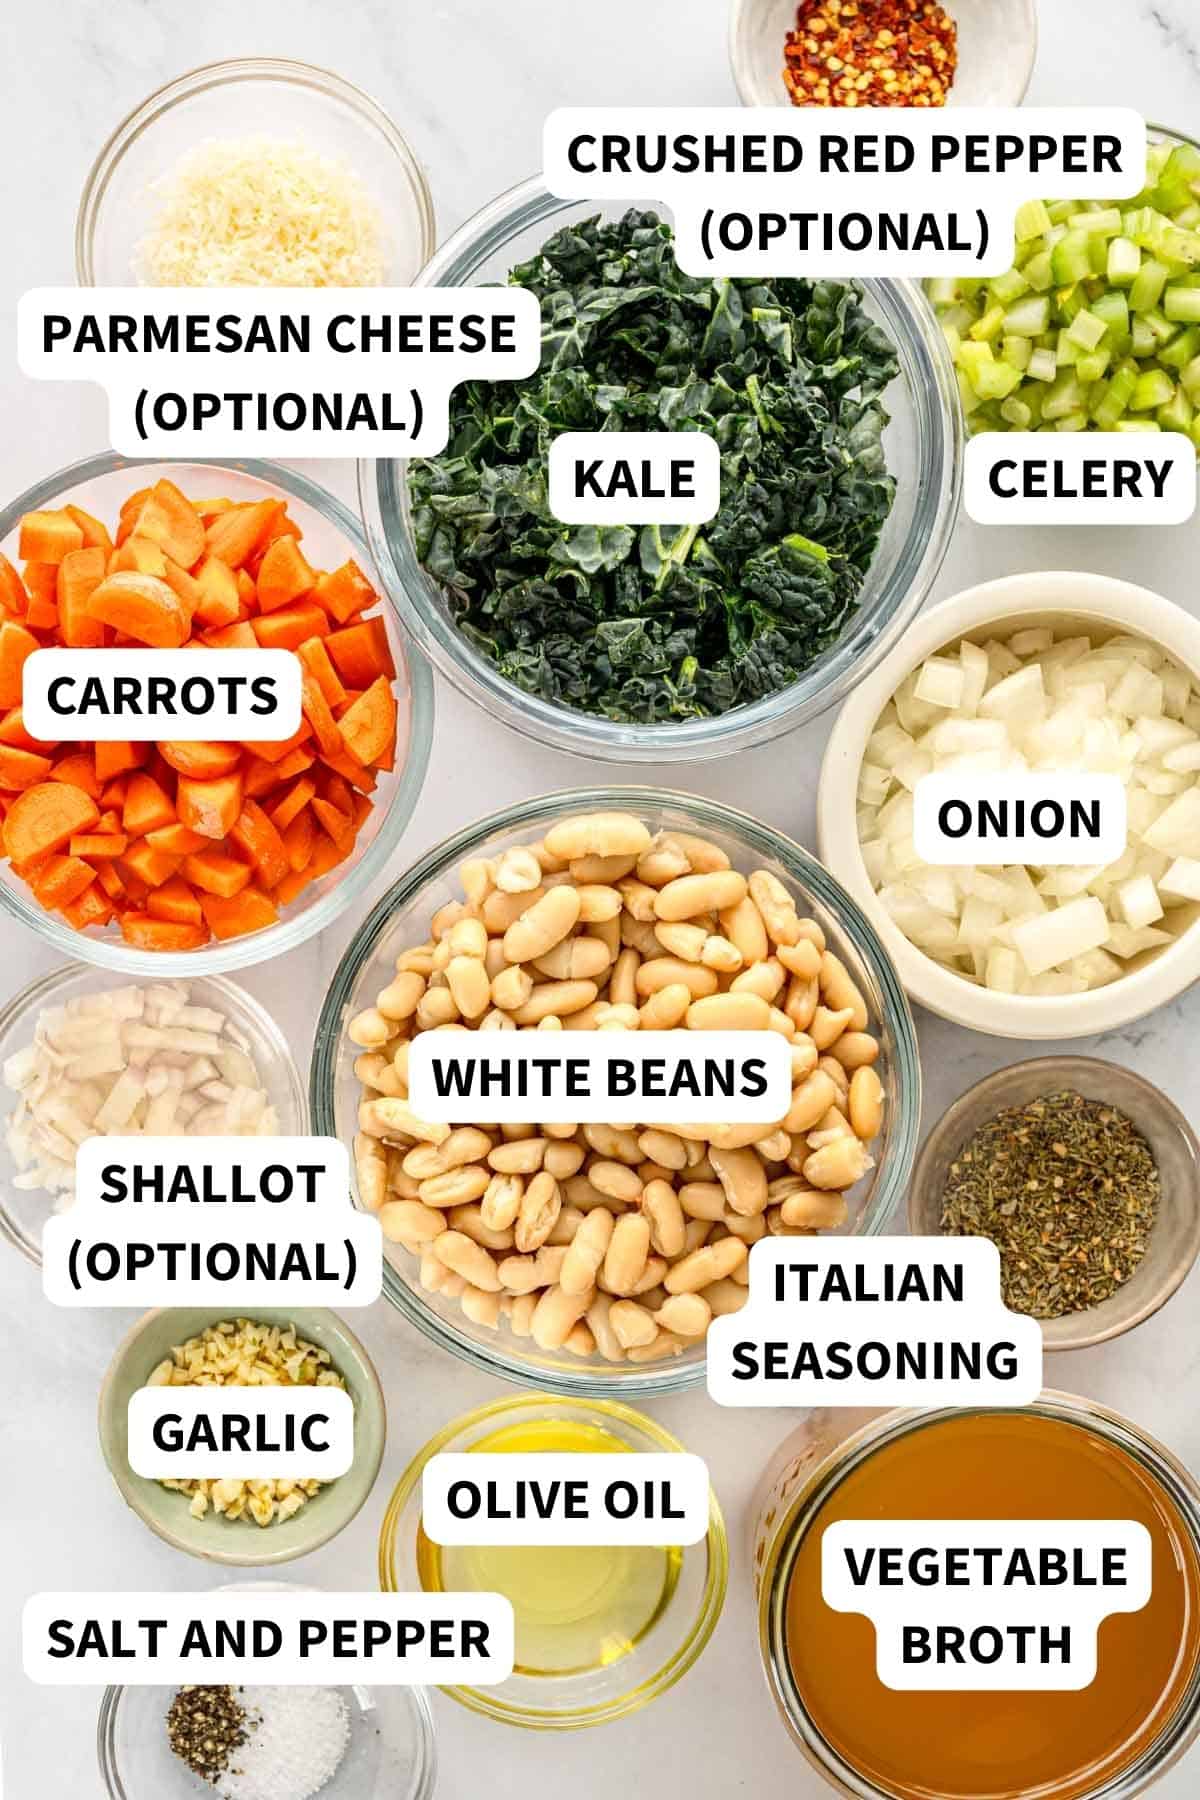 Labeled ingredients to make Tuscan white bean soup with kale.